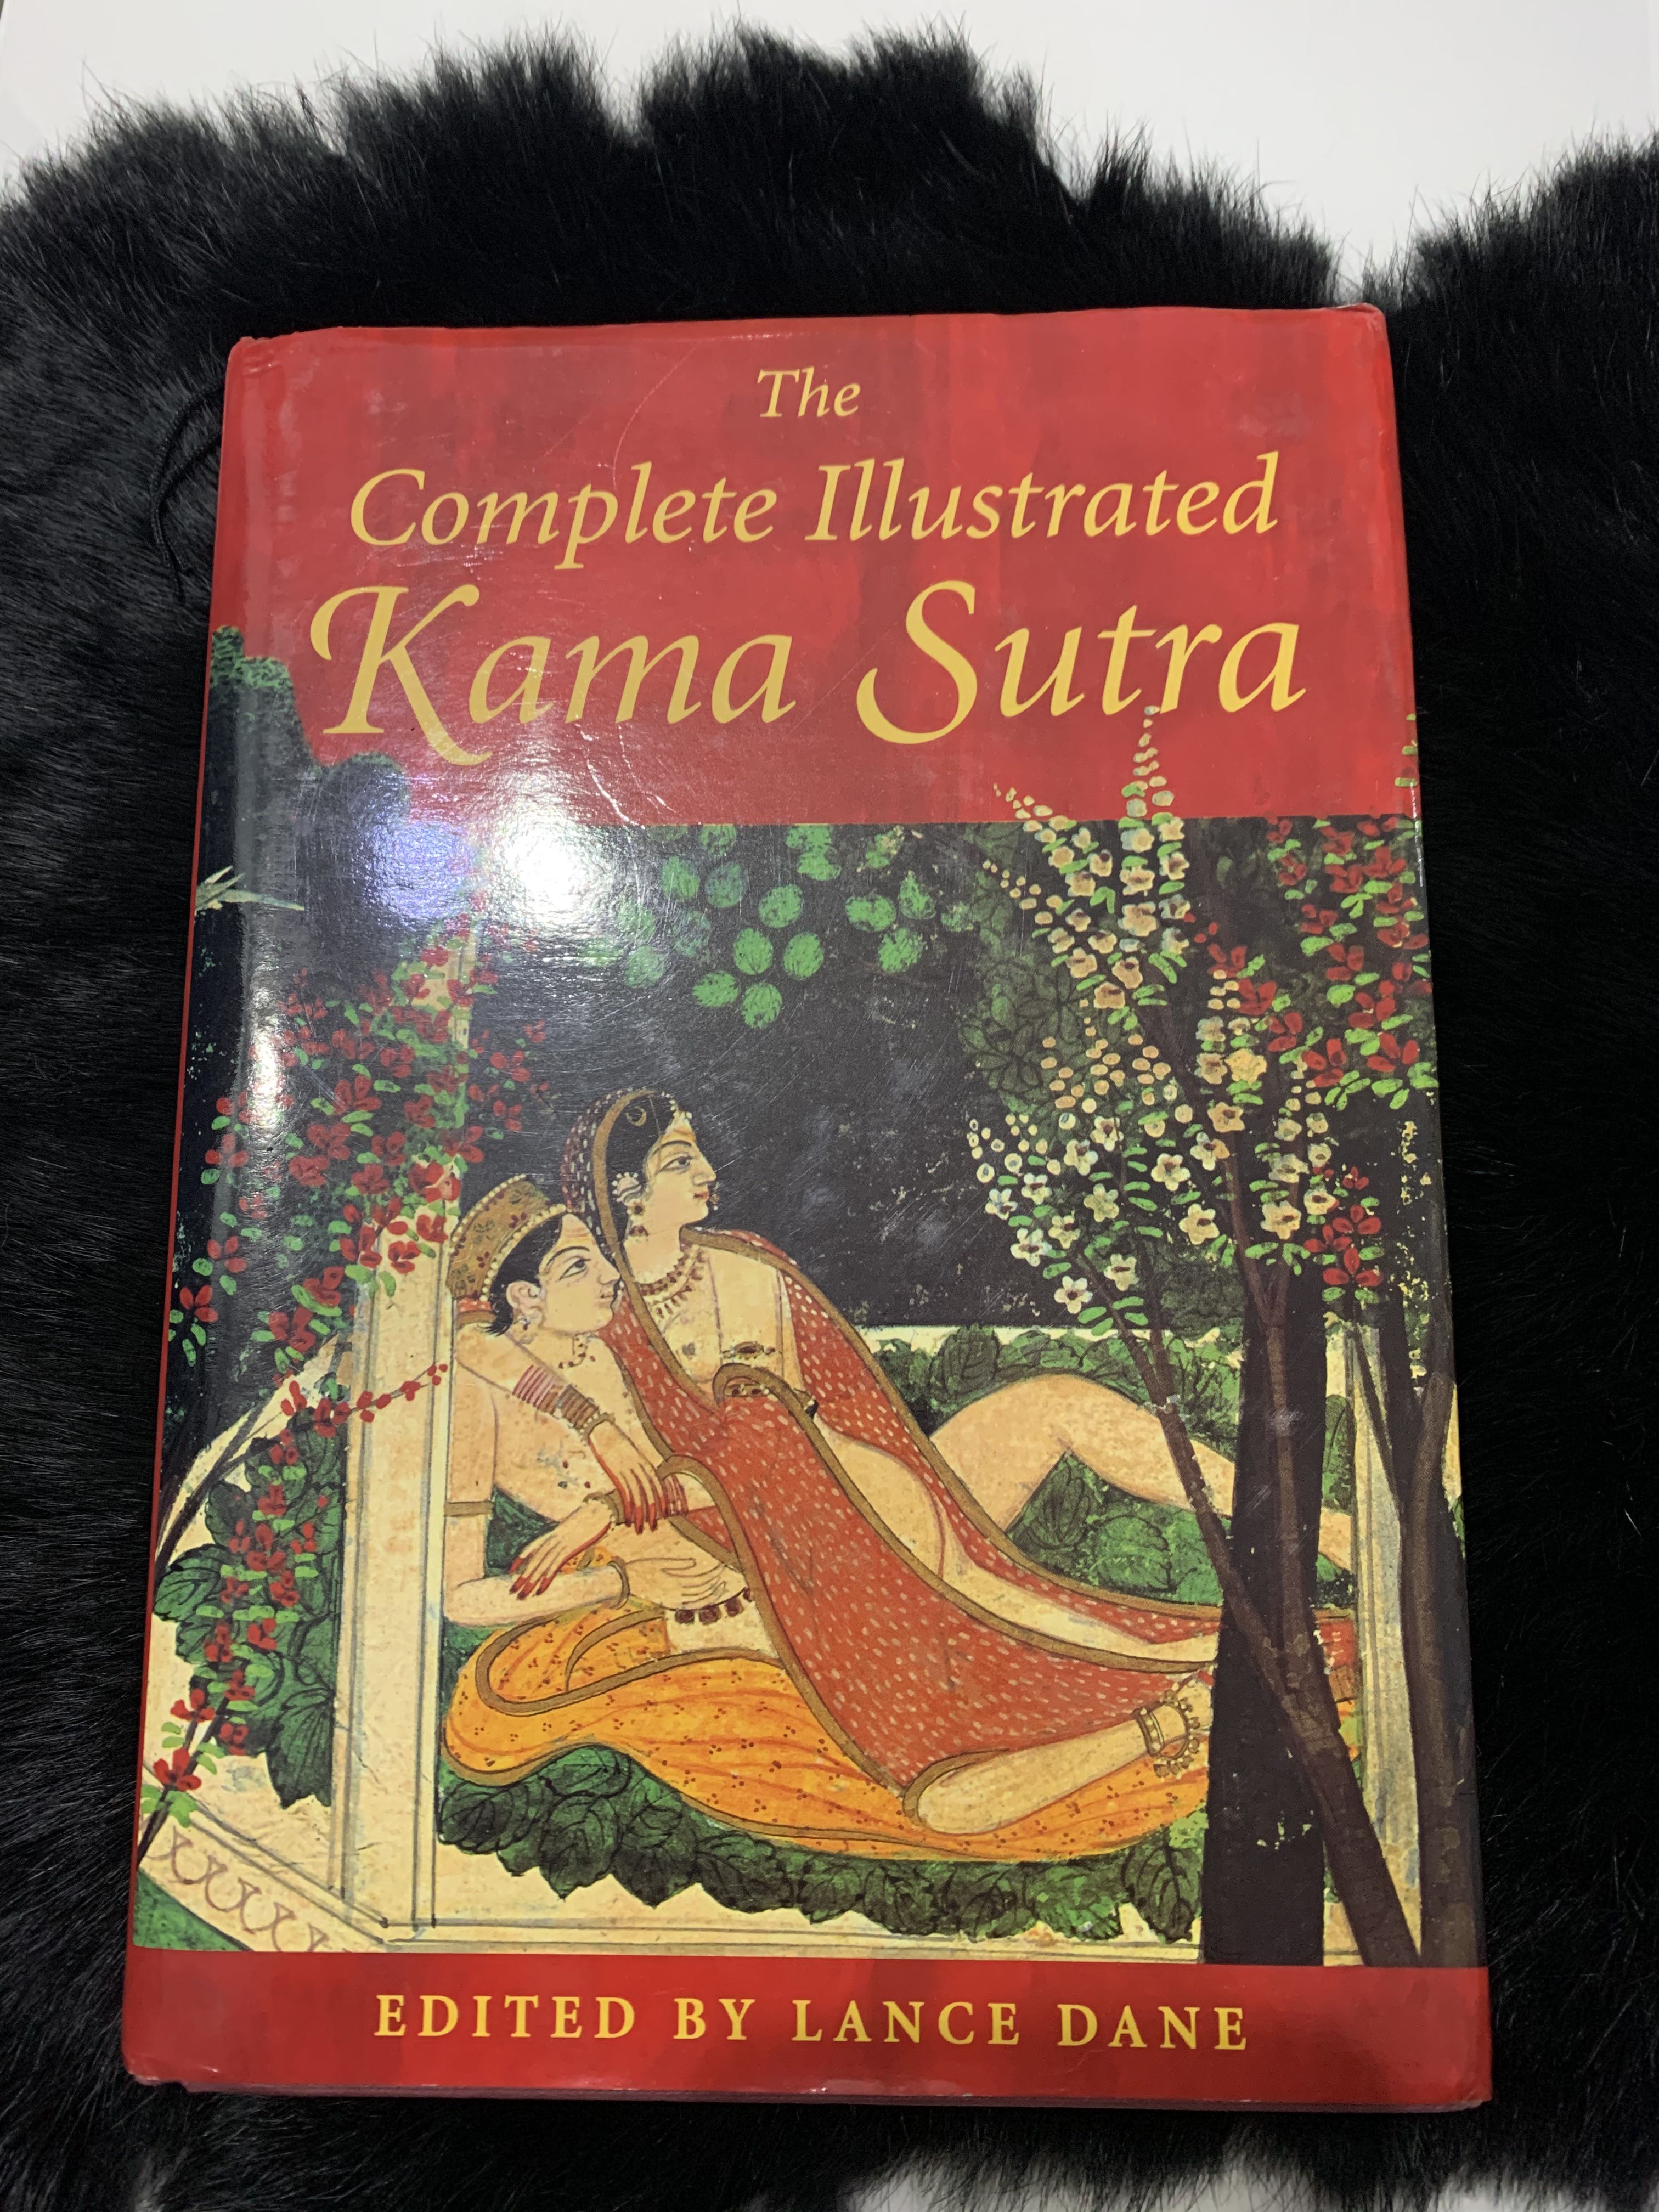 the complete illustrated kamasutra ebook free download